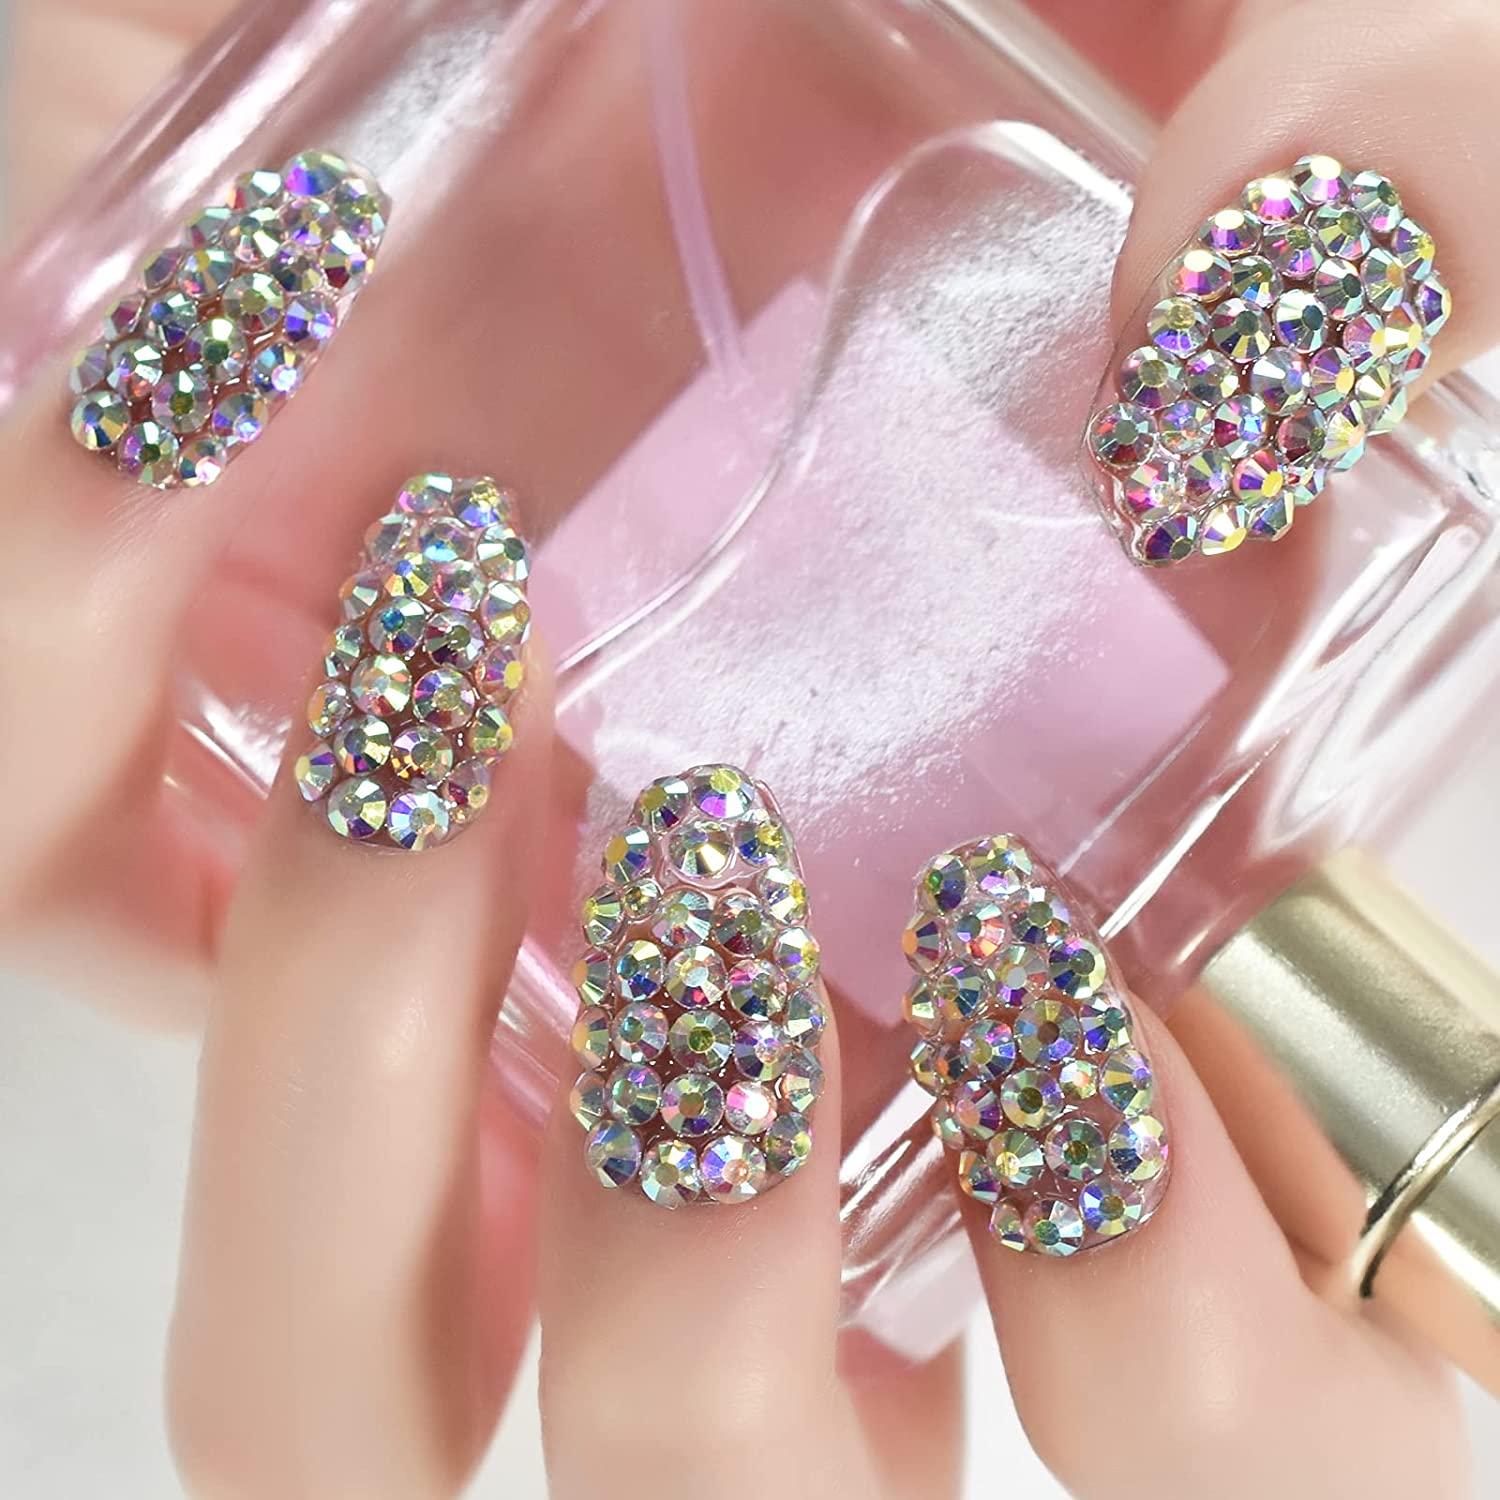 Ombre Nails, Sparkle Nails, Bling Press on Nails, Diamond Nails